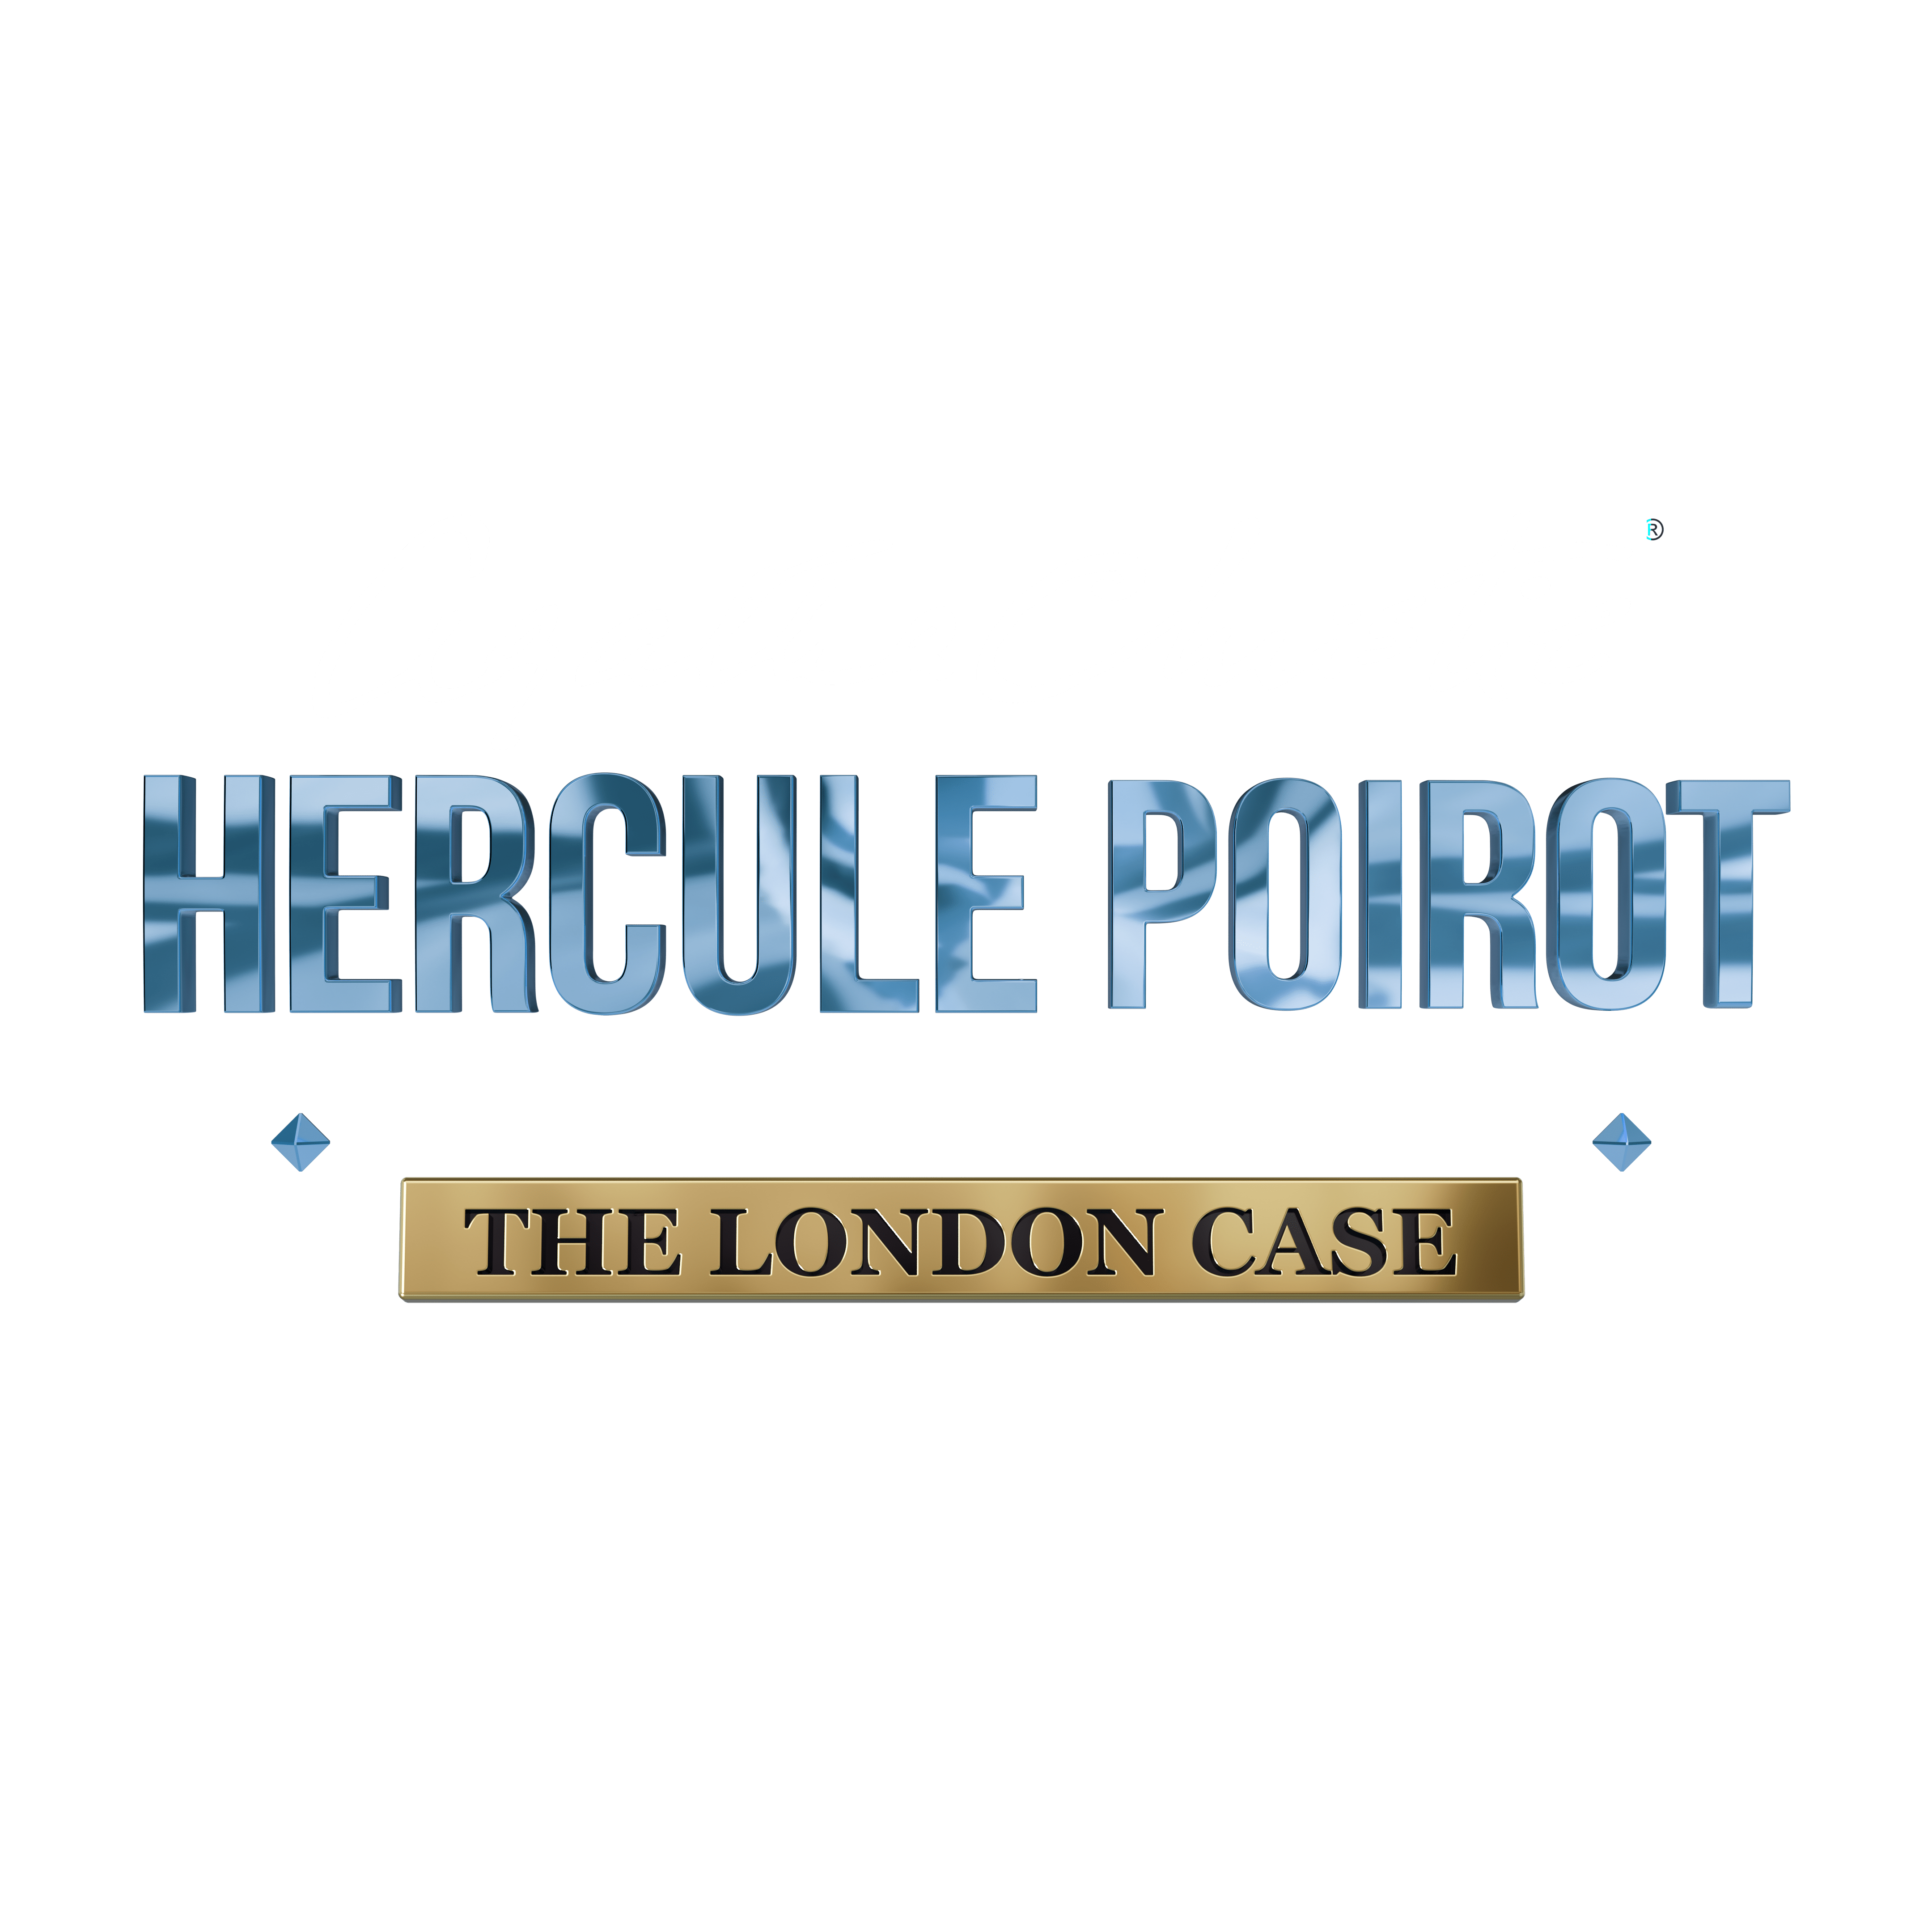 Agatha Christie - Hercule Poirot: One, PS5, Series, London PC - and The PS4, Xbox announced for Xbox Switch, Gematsu Case